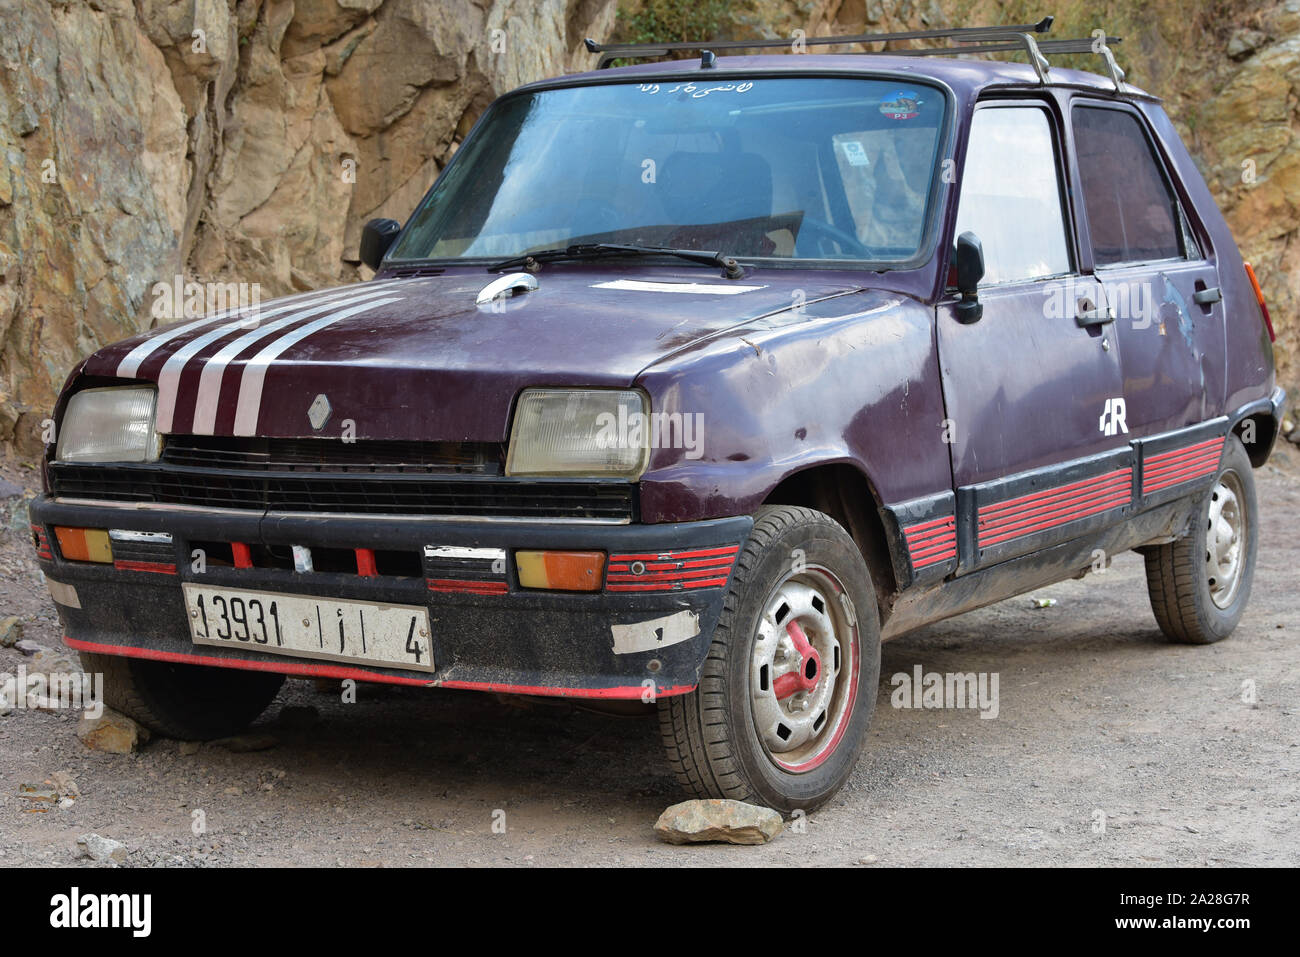 Old Renault Car High Resolution Stock Photography and Images - Alamy